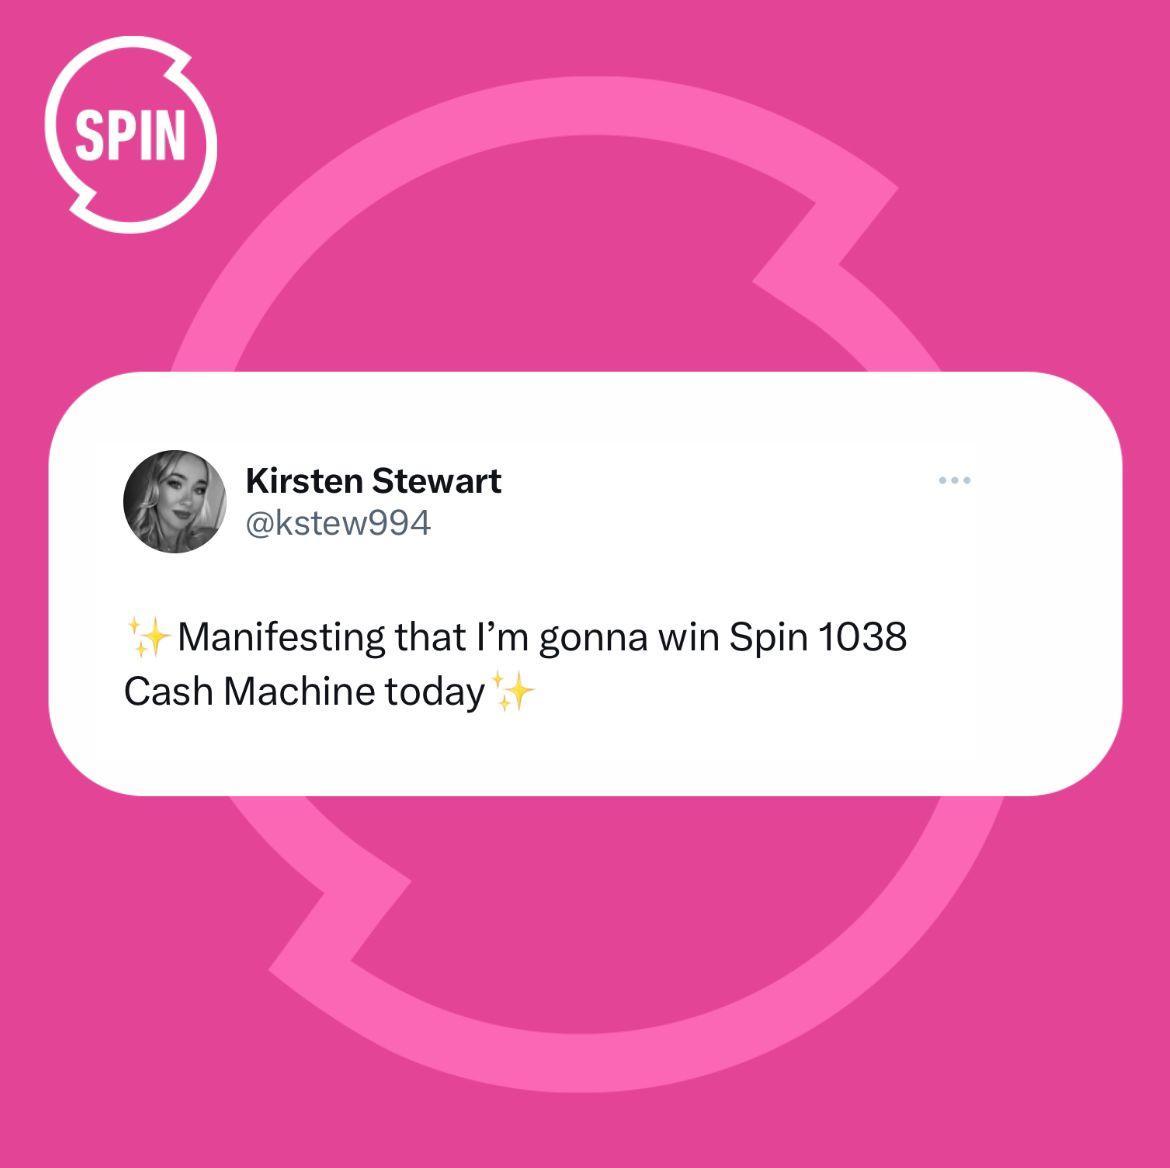 We're manifesting right with you 🤞 If you fancy being our next winner, then you need to keep SPIN loud to hear the EXACT cash amount everyday! Text ‘SPIN’ to 57557. Texts cost €2.50 plus standard message. Over 18’s Only, T&C’s at spin1038.com ✍️TW/@kstew994